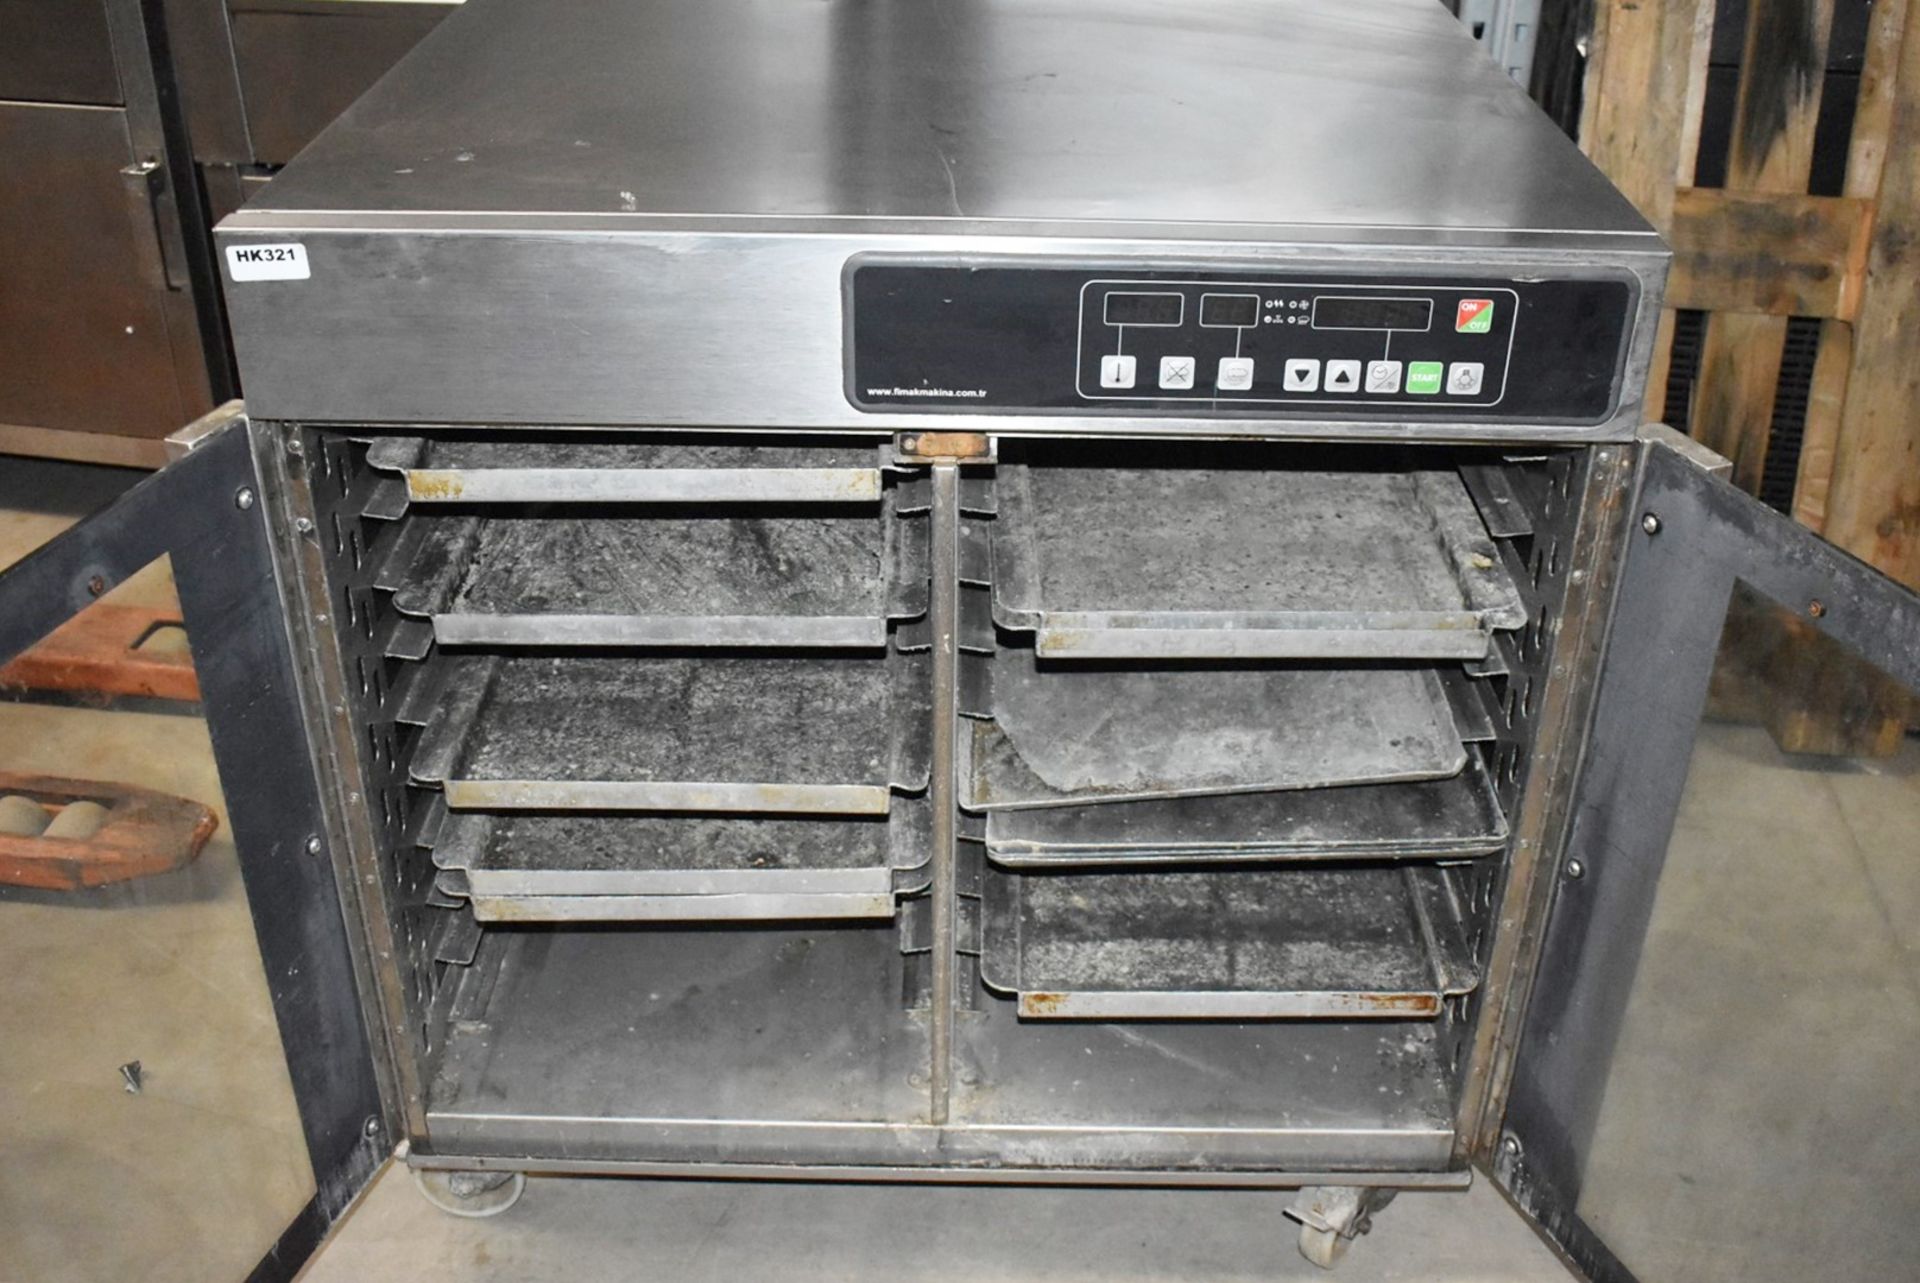 1 x FiMAK Windrose FW10 Convection Baking Oven - 240v - Size: 95 x 95 x 95 cms - Ref : HK321 WH2 B5G - Image 6 of 8